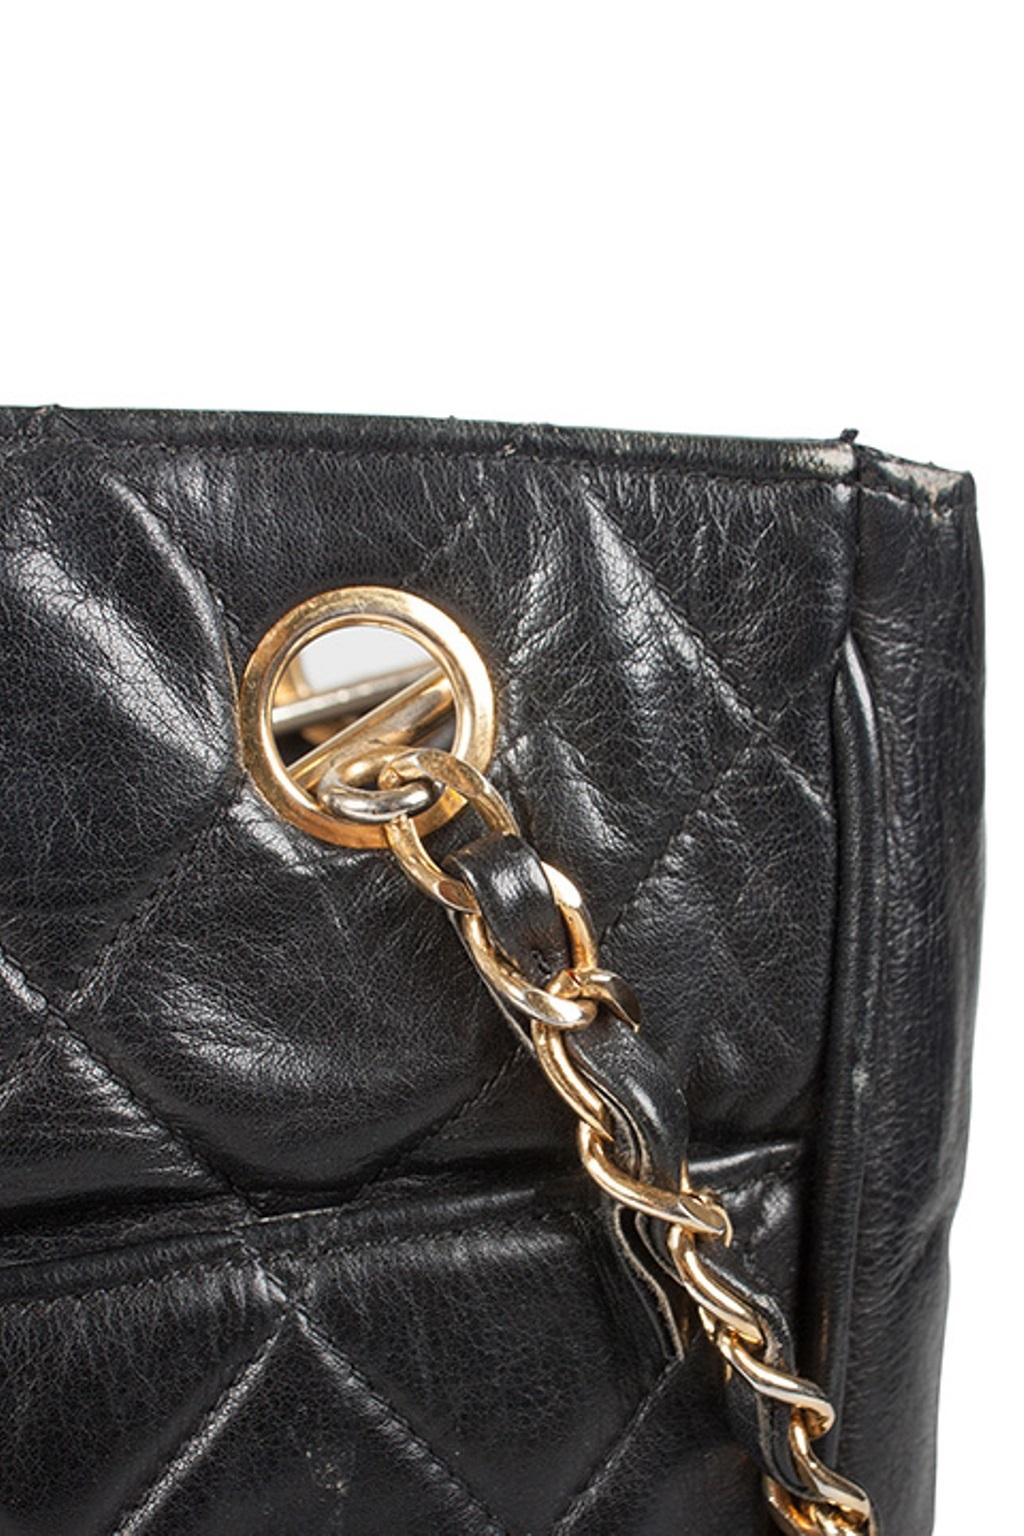 Chanel Black Quilted Leather Vintage Tote 2